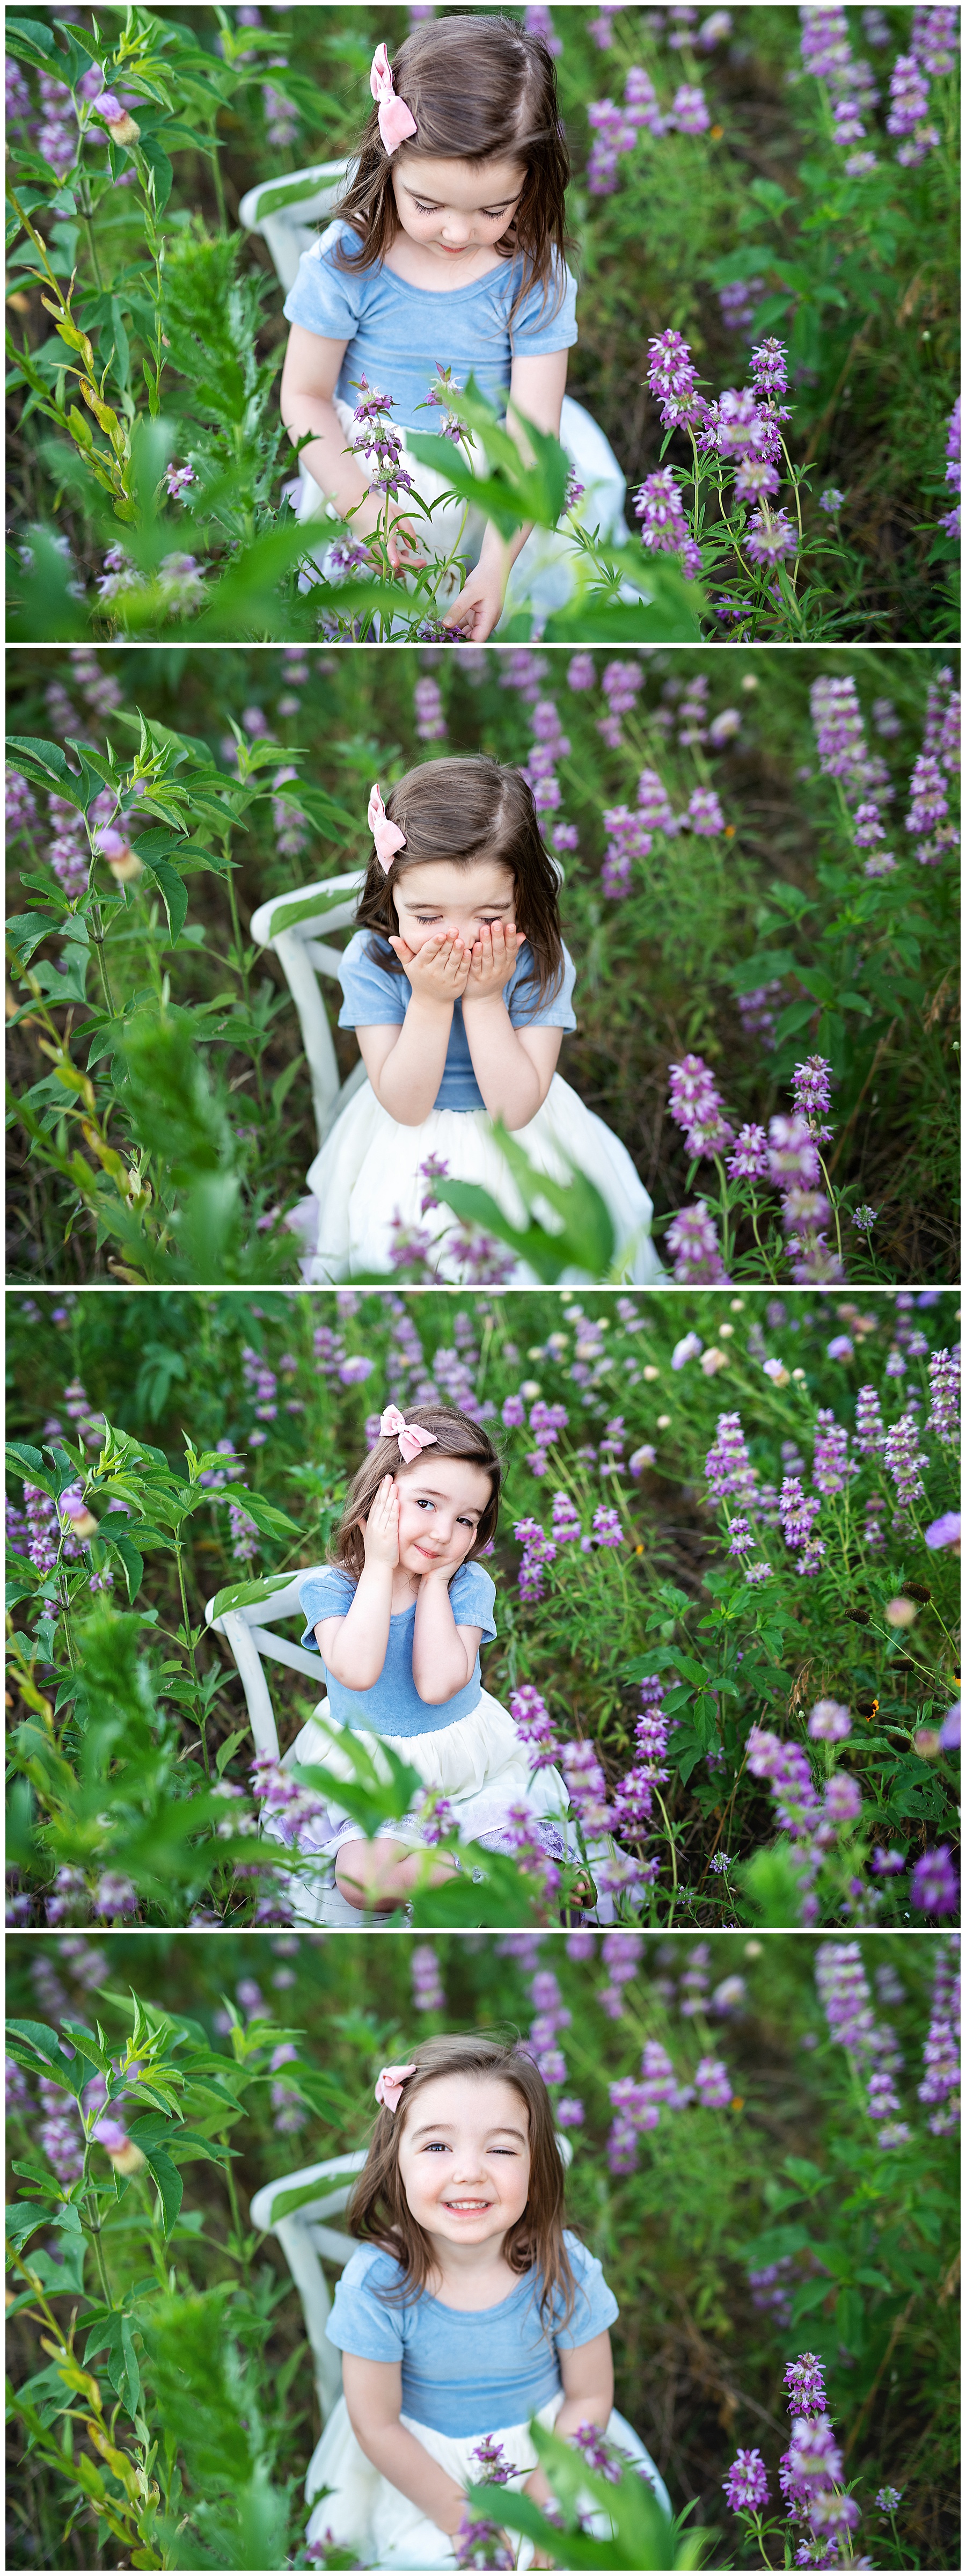 laughing within the wildflowers